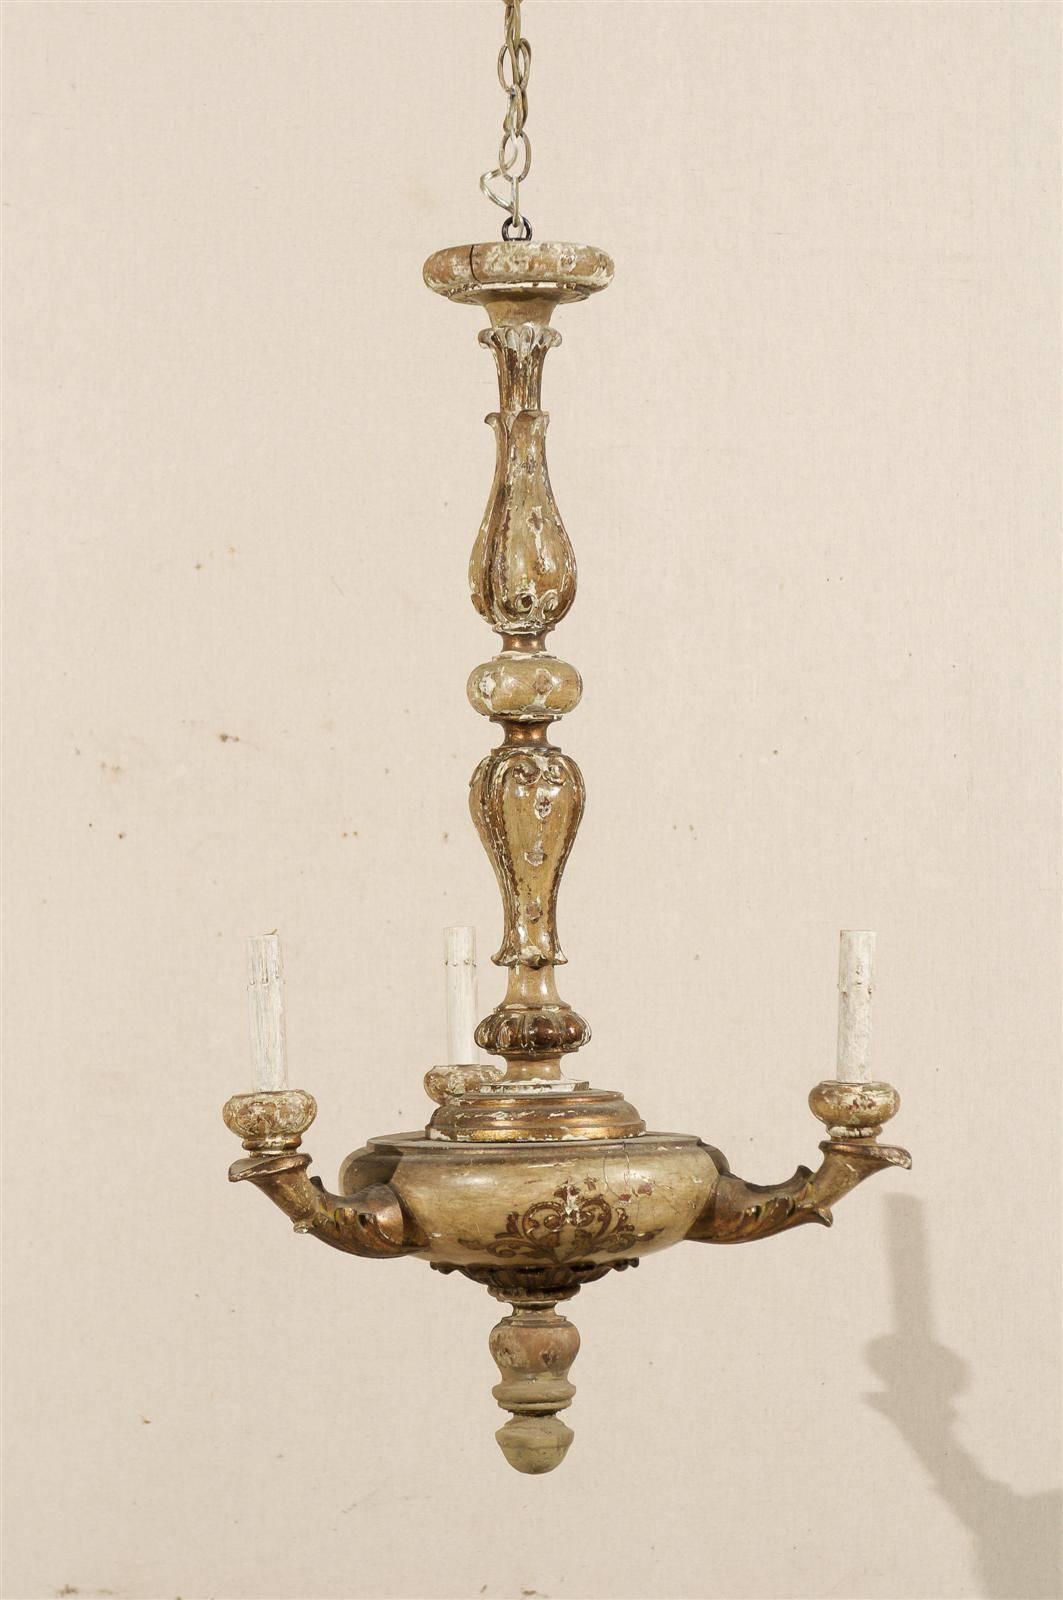 An Italian three-light gilded and painted wood chandelier with nice floral decoration on the body and central wooden column. From the early 20th century.

This gilded and painted wood chandelier has been rewired for the US and comes with a